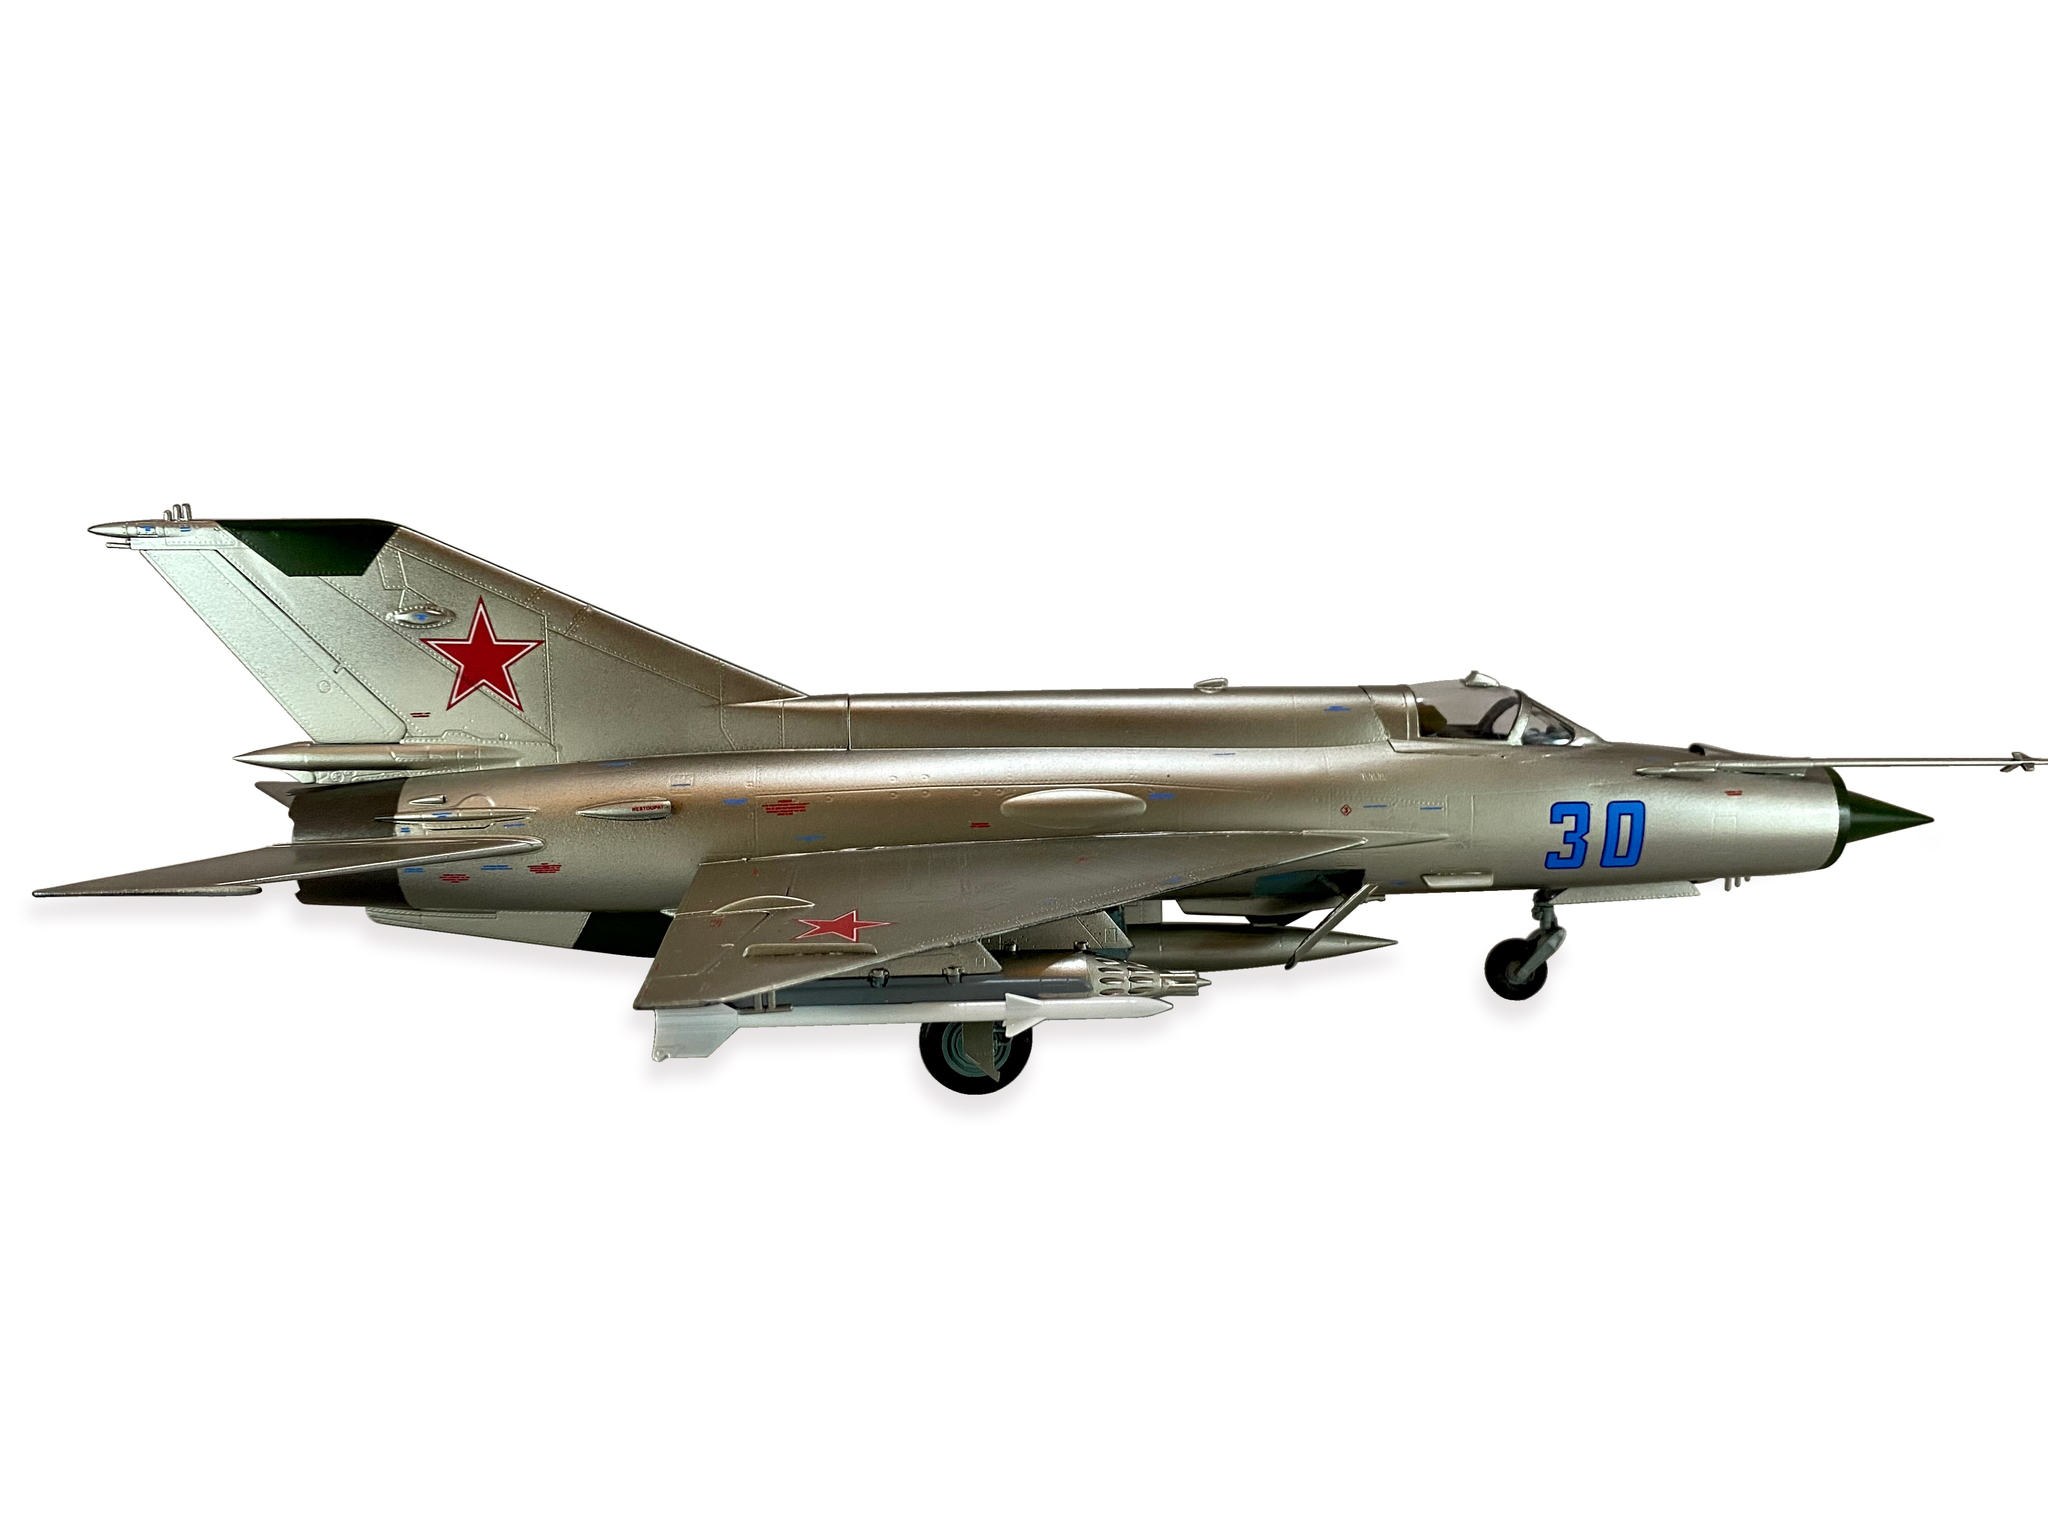 MiG-21MF at 1:48 - My, Modeling, Stand modeling, Scale model, Jet, 1:48, Made in USSR, the USSR, Longpost, MiG-21